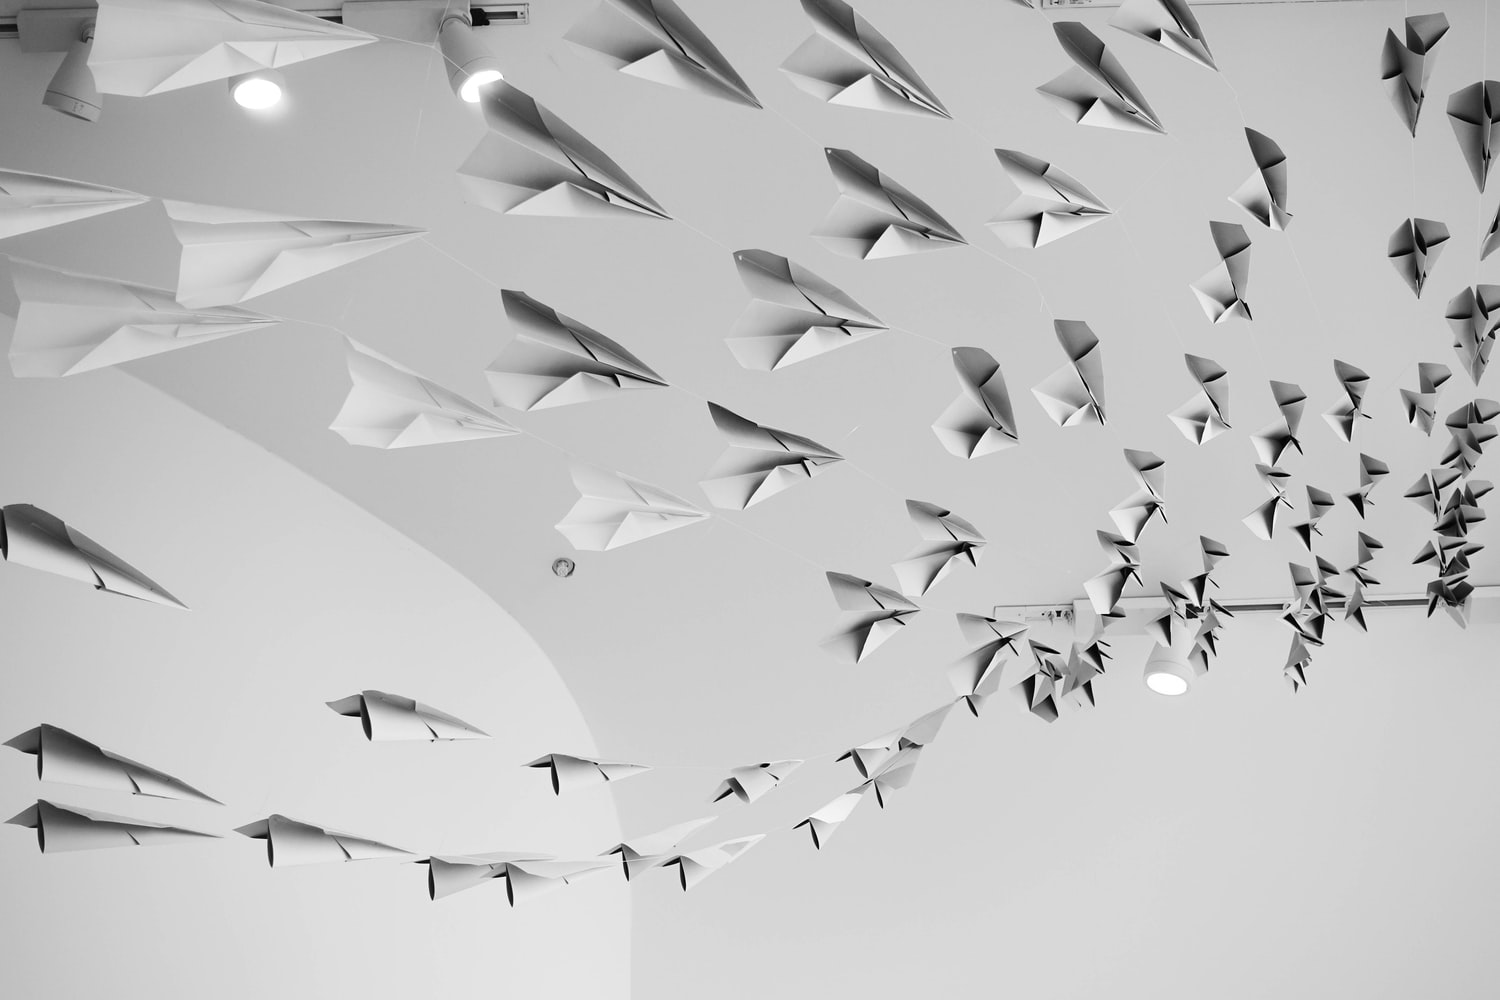 A school of paper planes flow towards a white ceiling in an open room